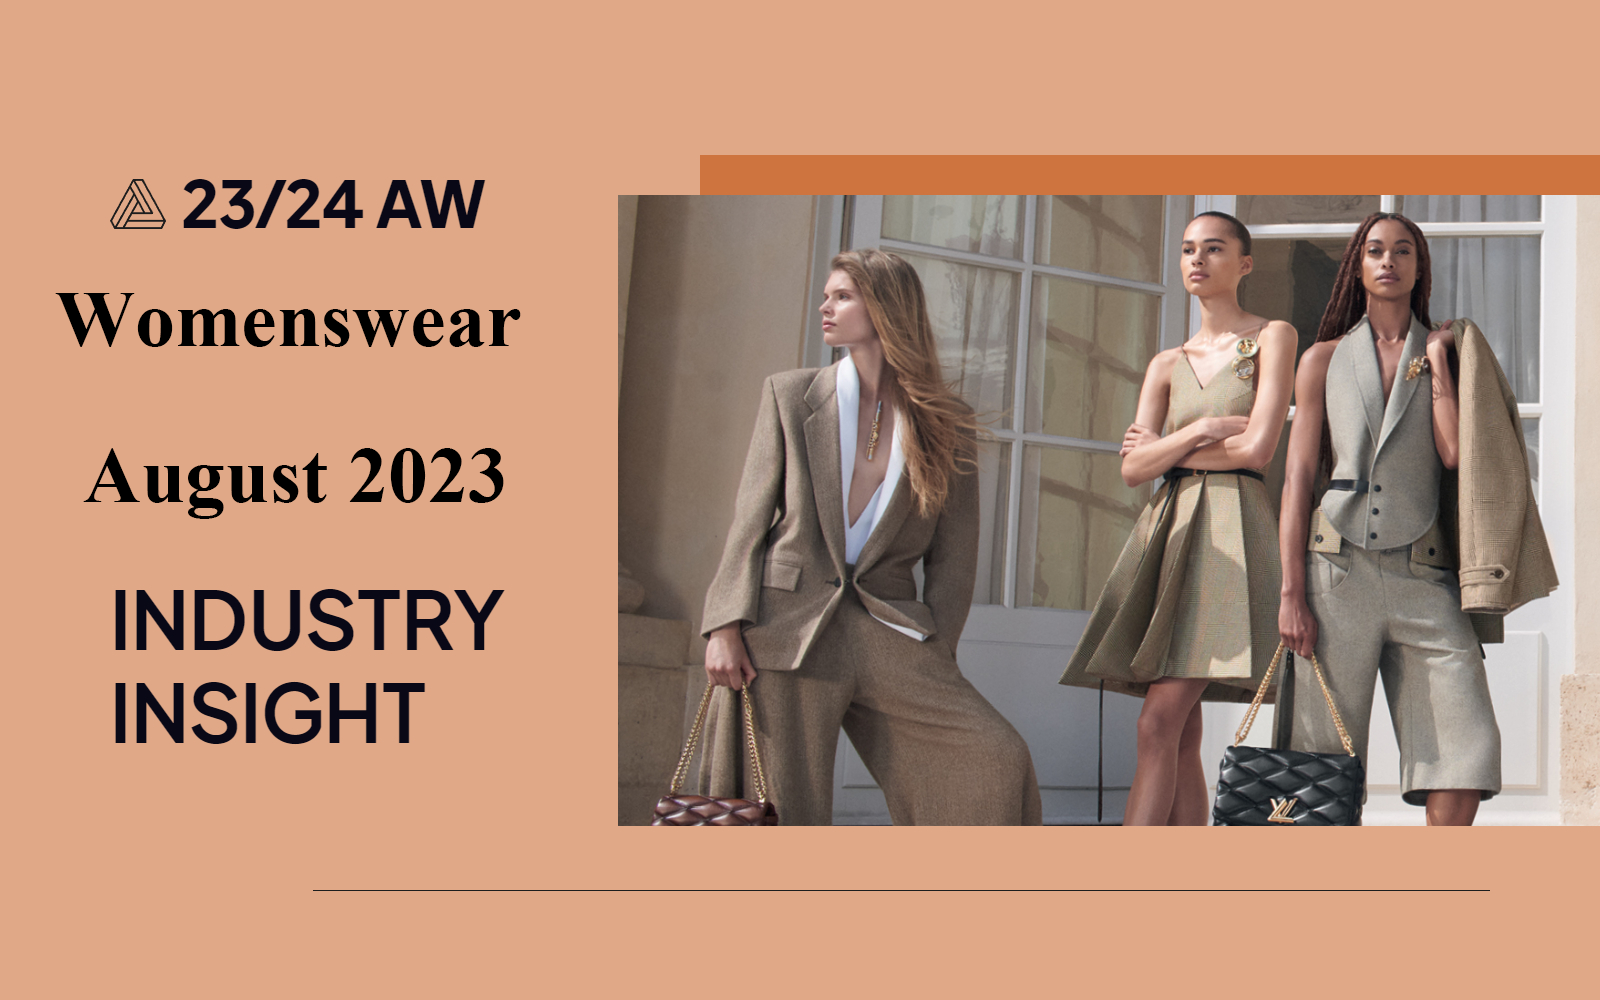 August 2023 -- The Industry Insight of Womenswear